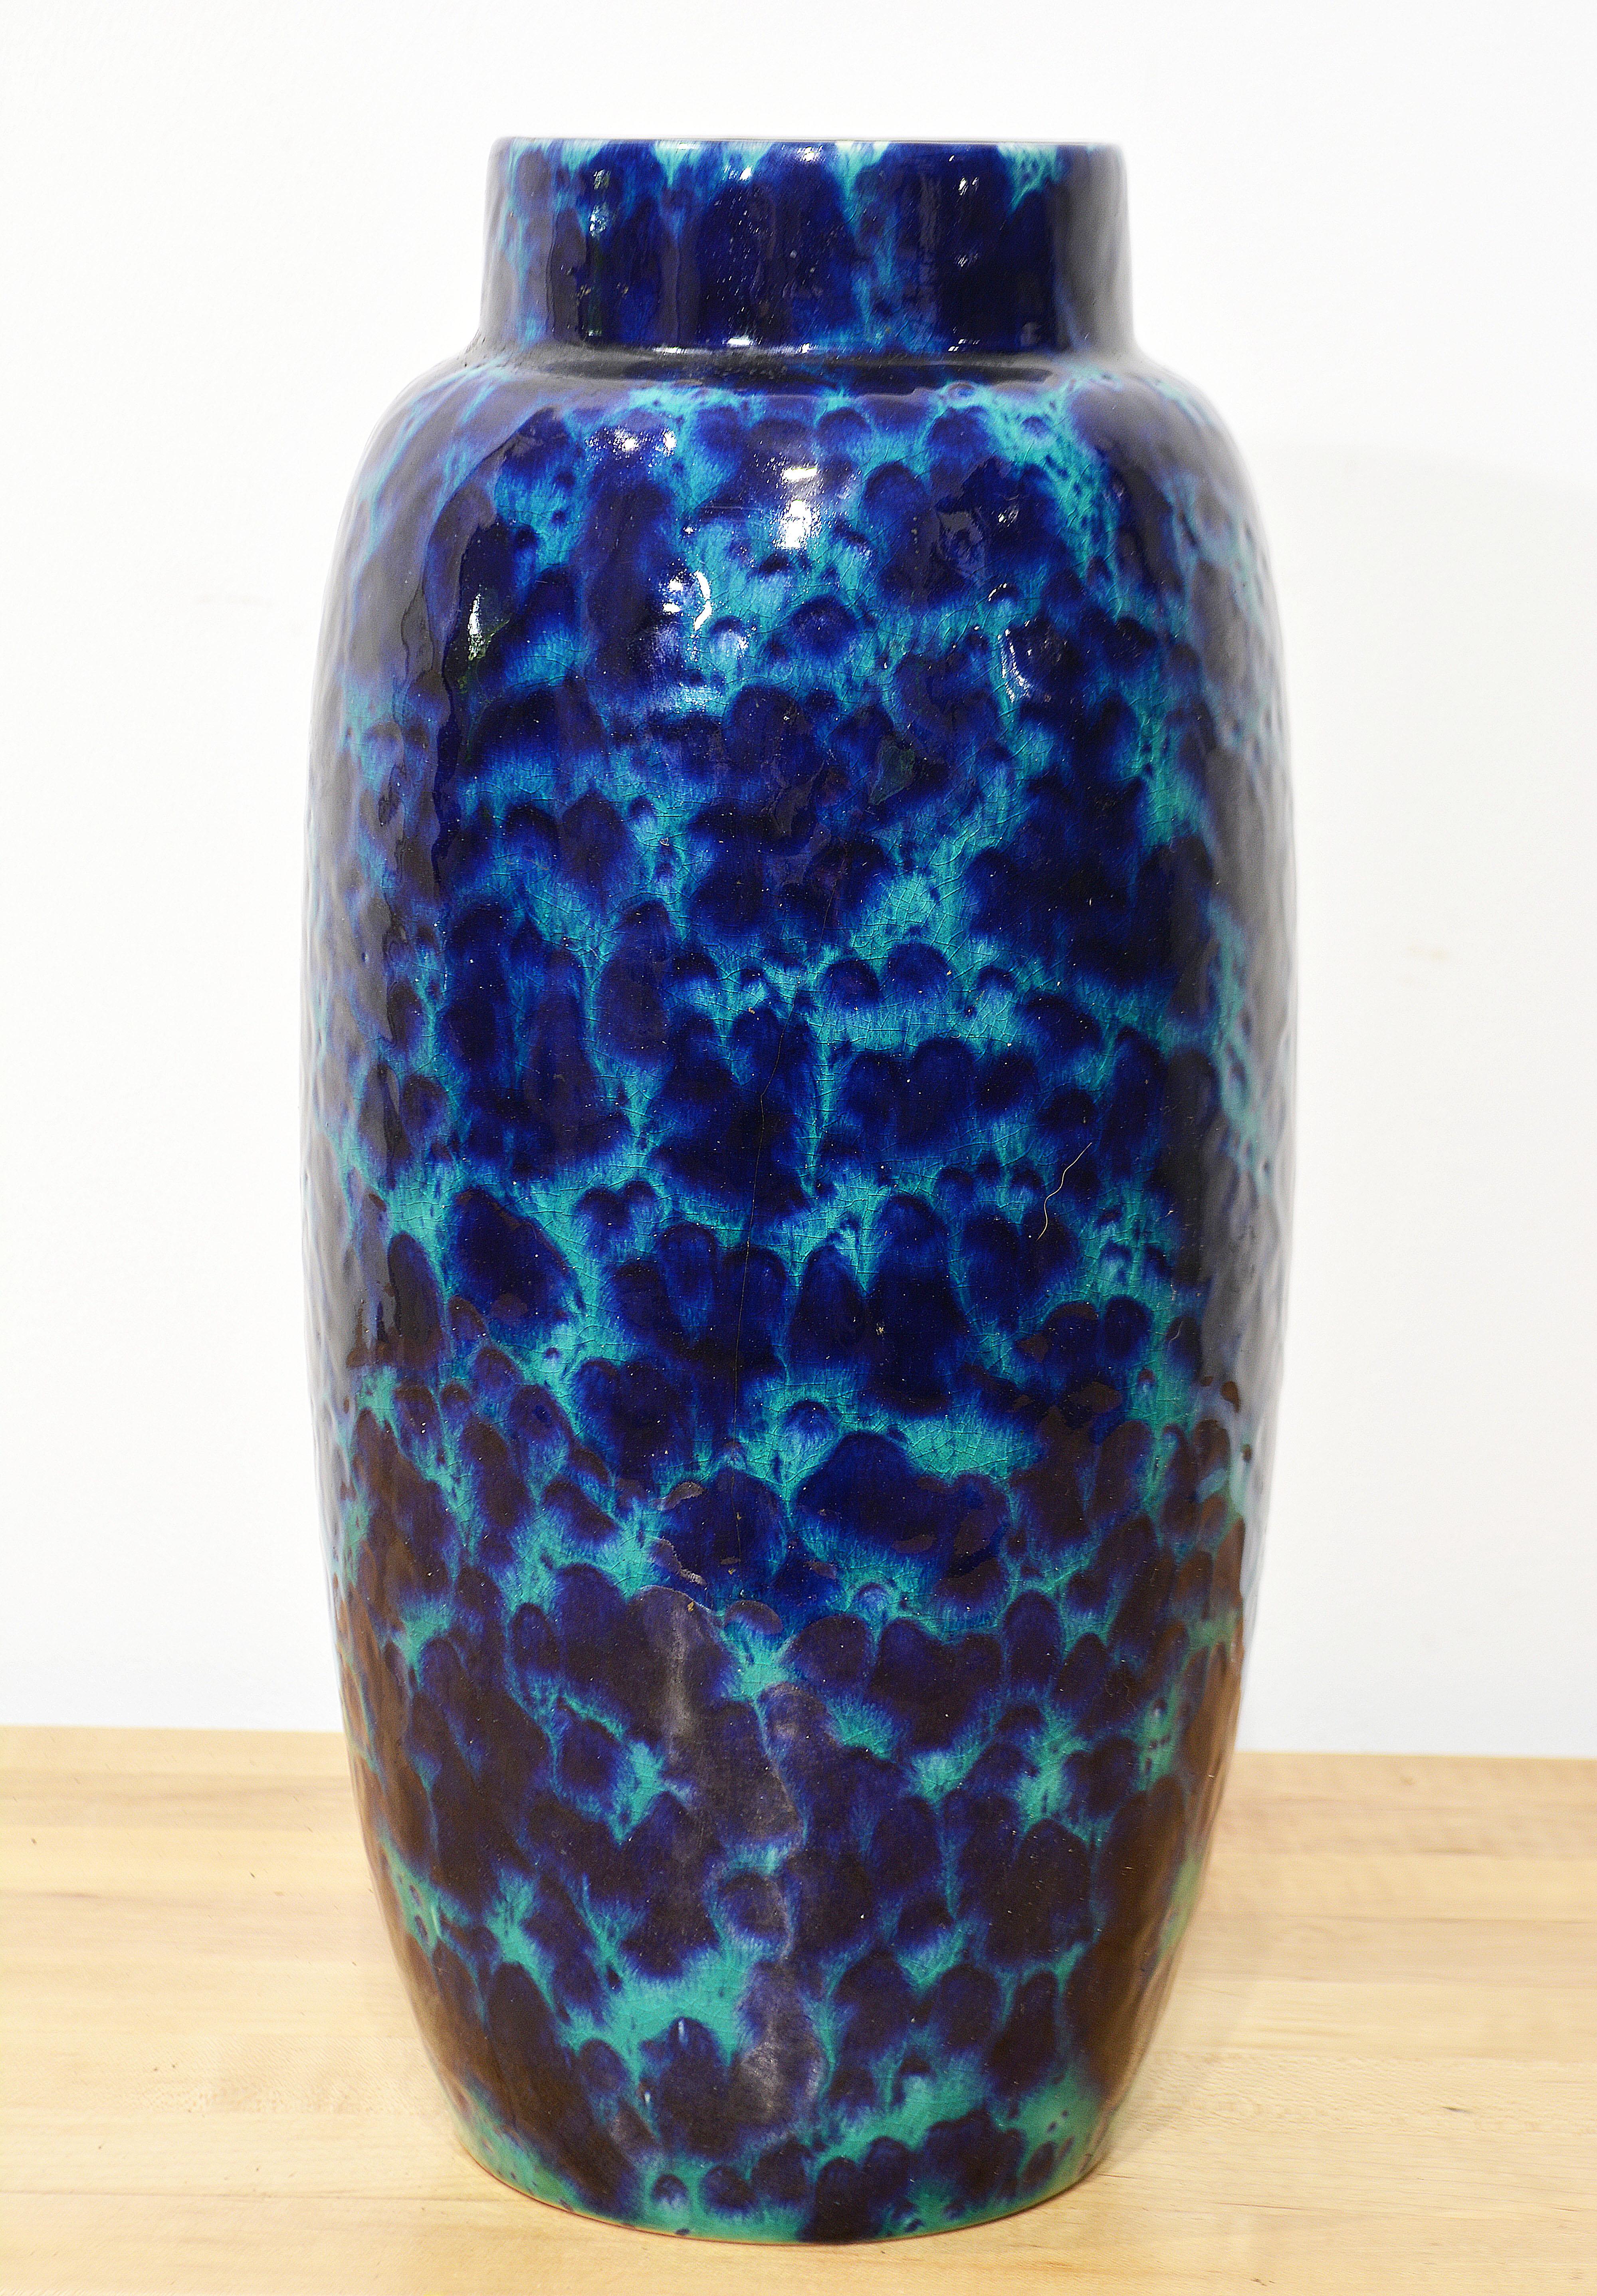 German Mid Century Modern Deep Blue and Turquoise Art Pottery Vase by Scheurich For Sale 2